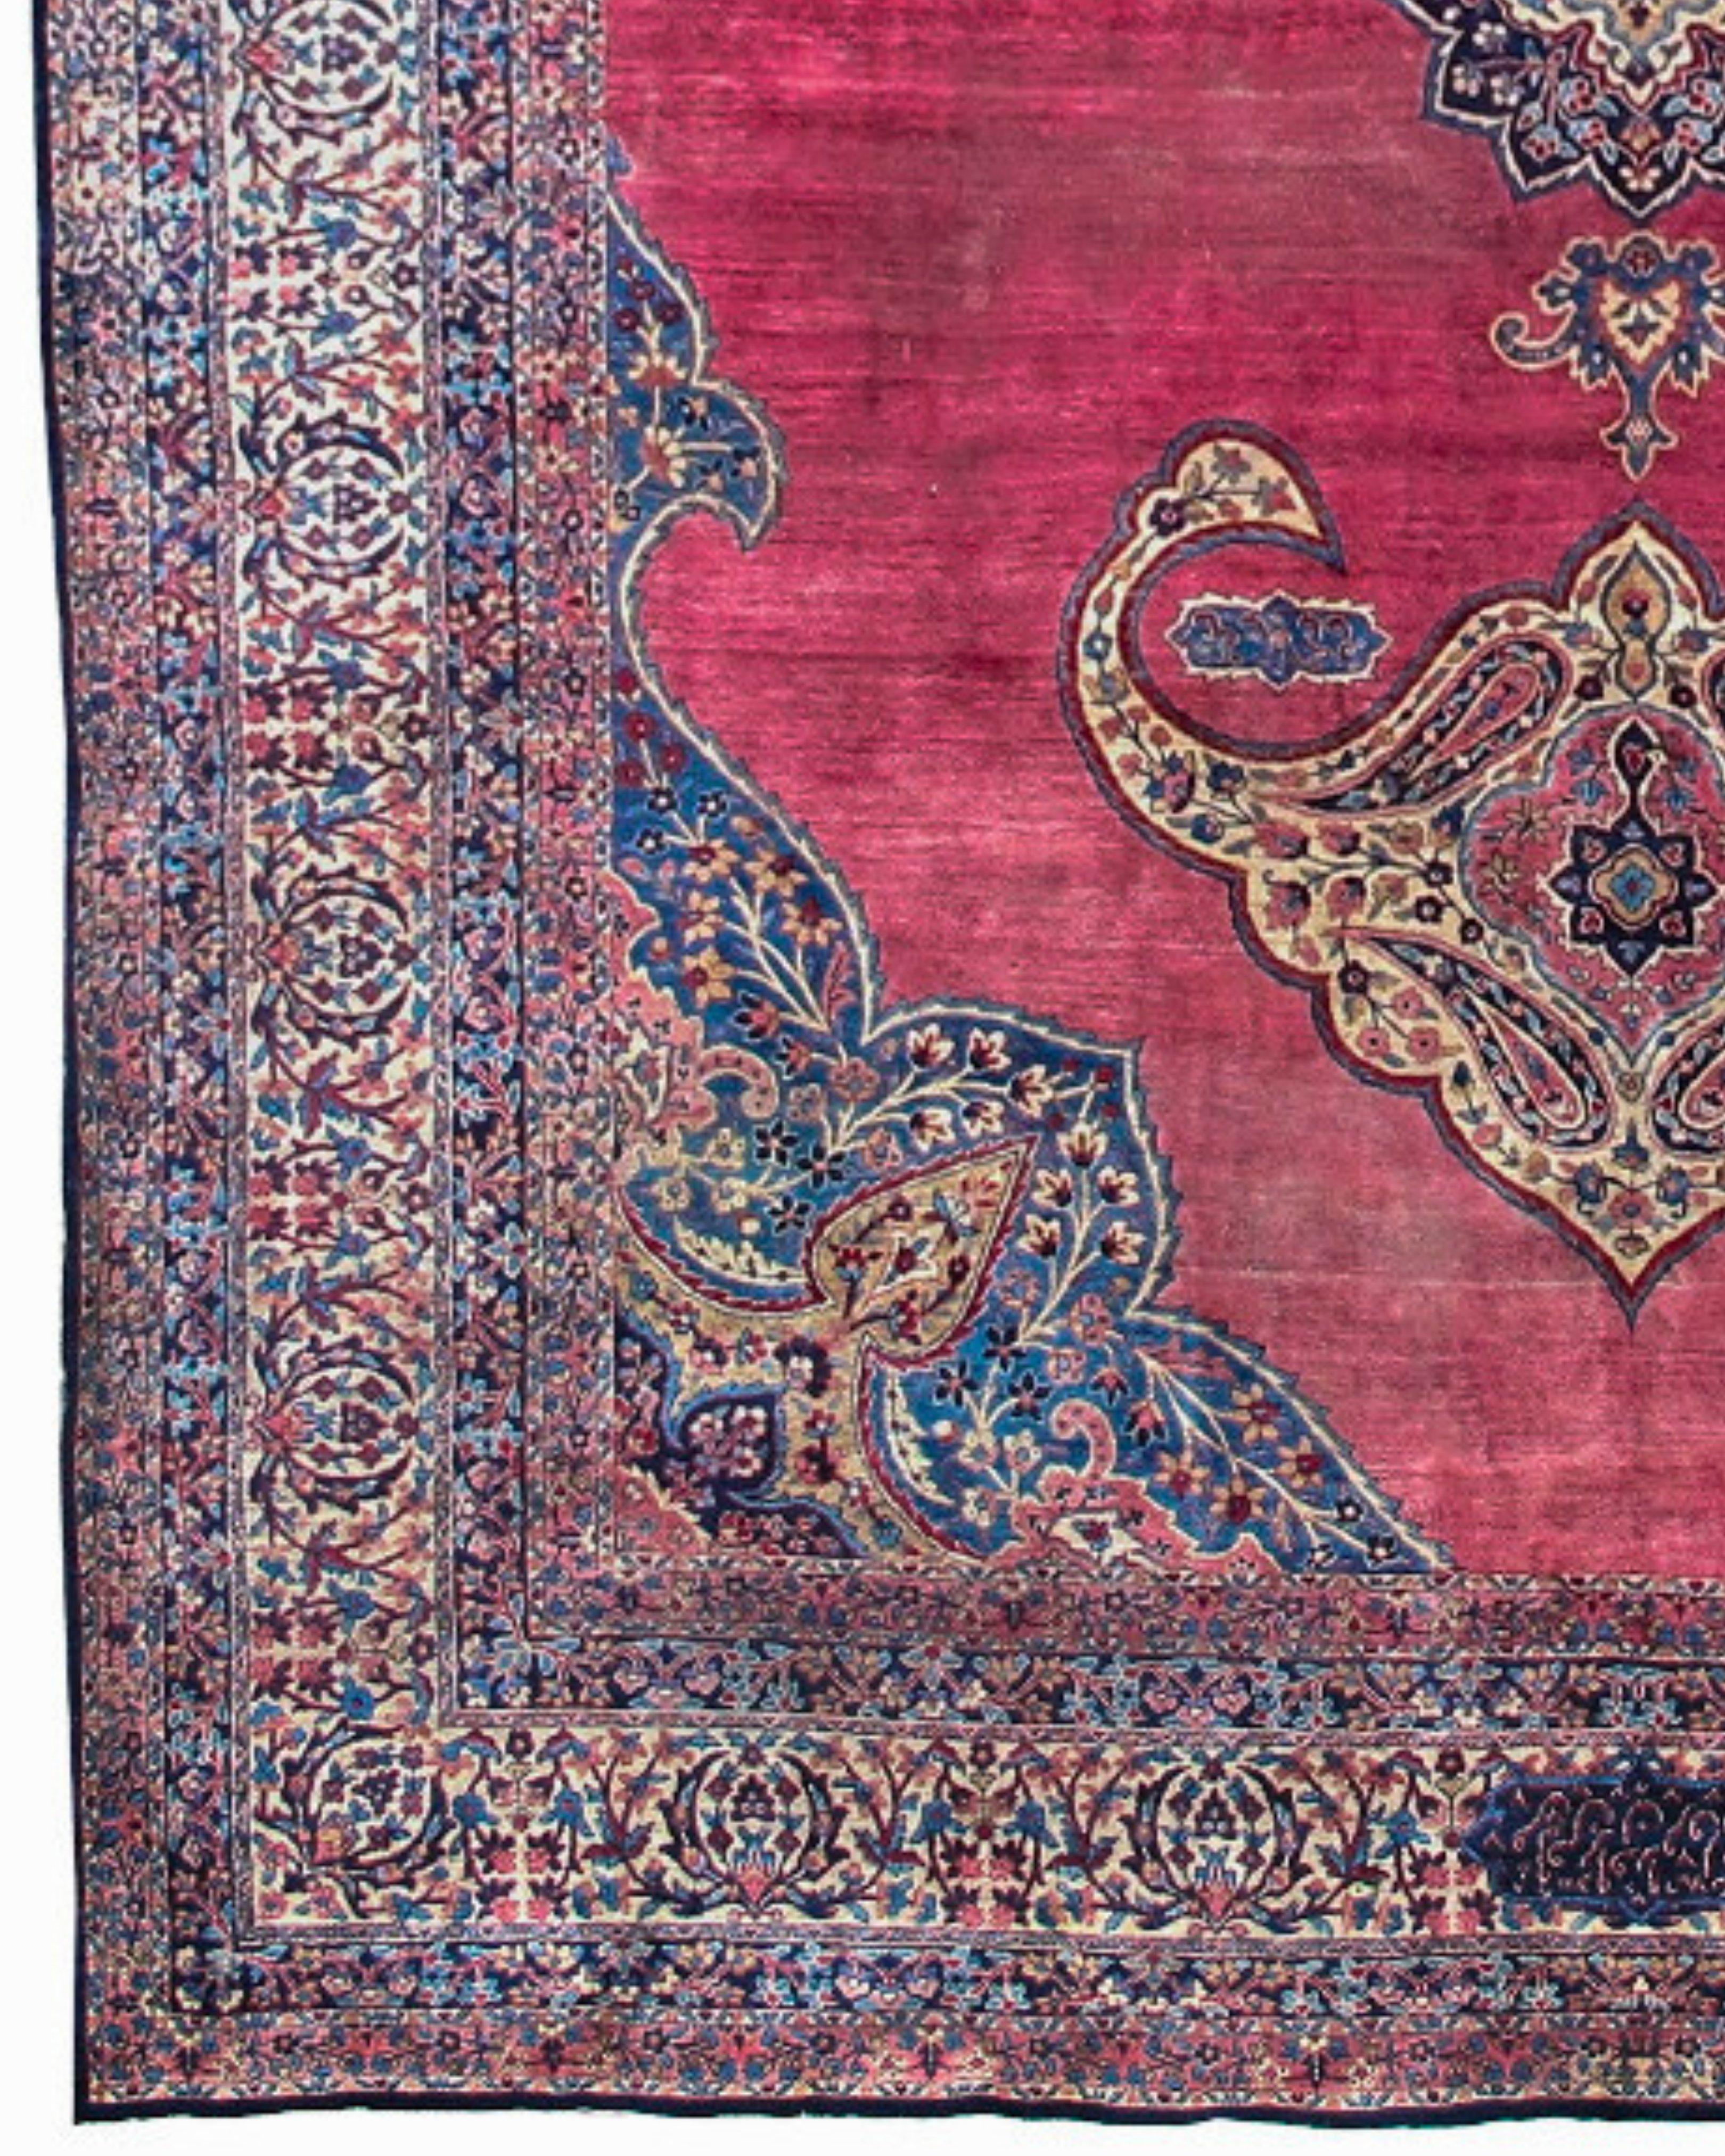 Antique Large Persian Oversized Kirman Rug, Early 20th Century

This fine oversized Kerman corridor carpet from southeastern Persia melds the classicism of early Persian medallion carpets of the Safavid age (1501-1722) with the elegance and grace of